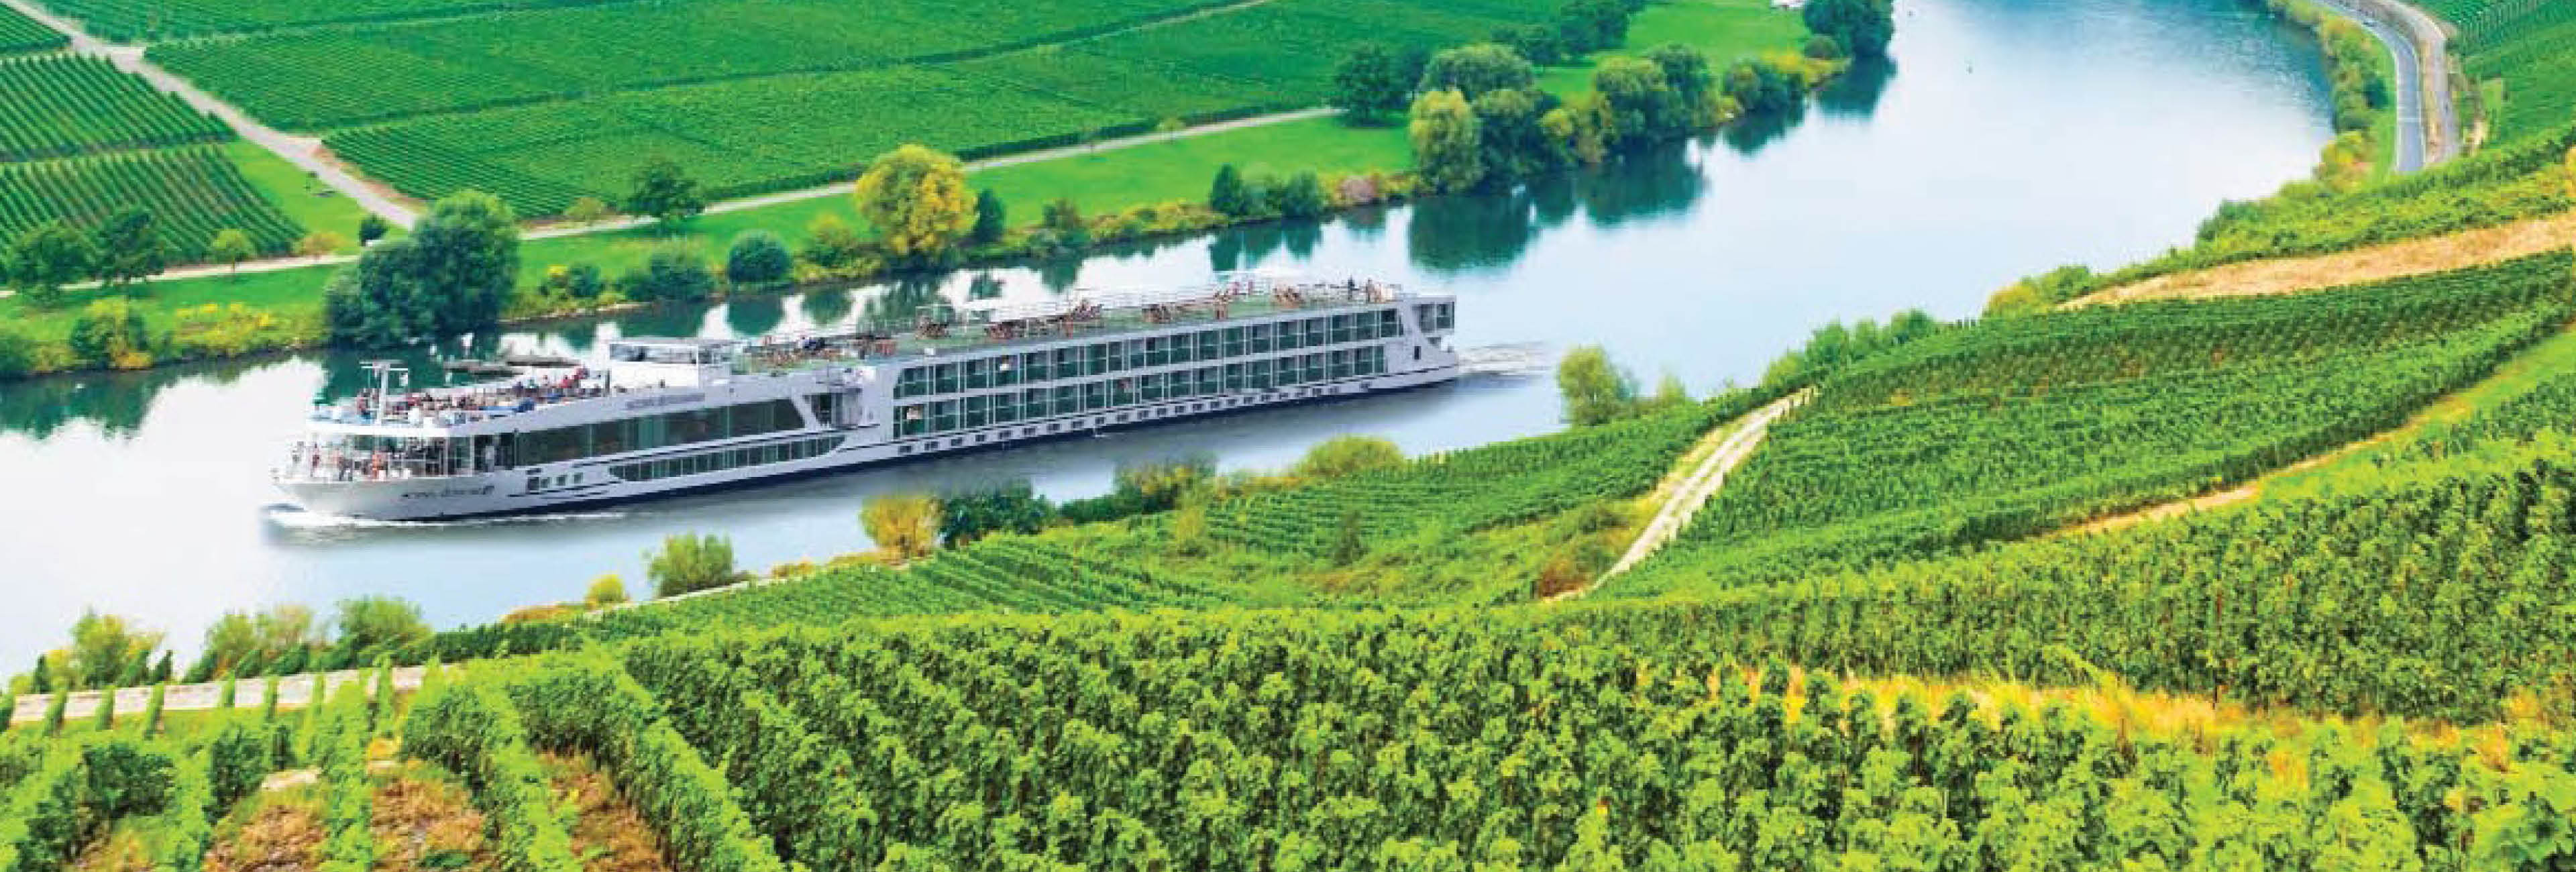 scenic river cruise offers